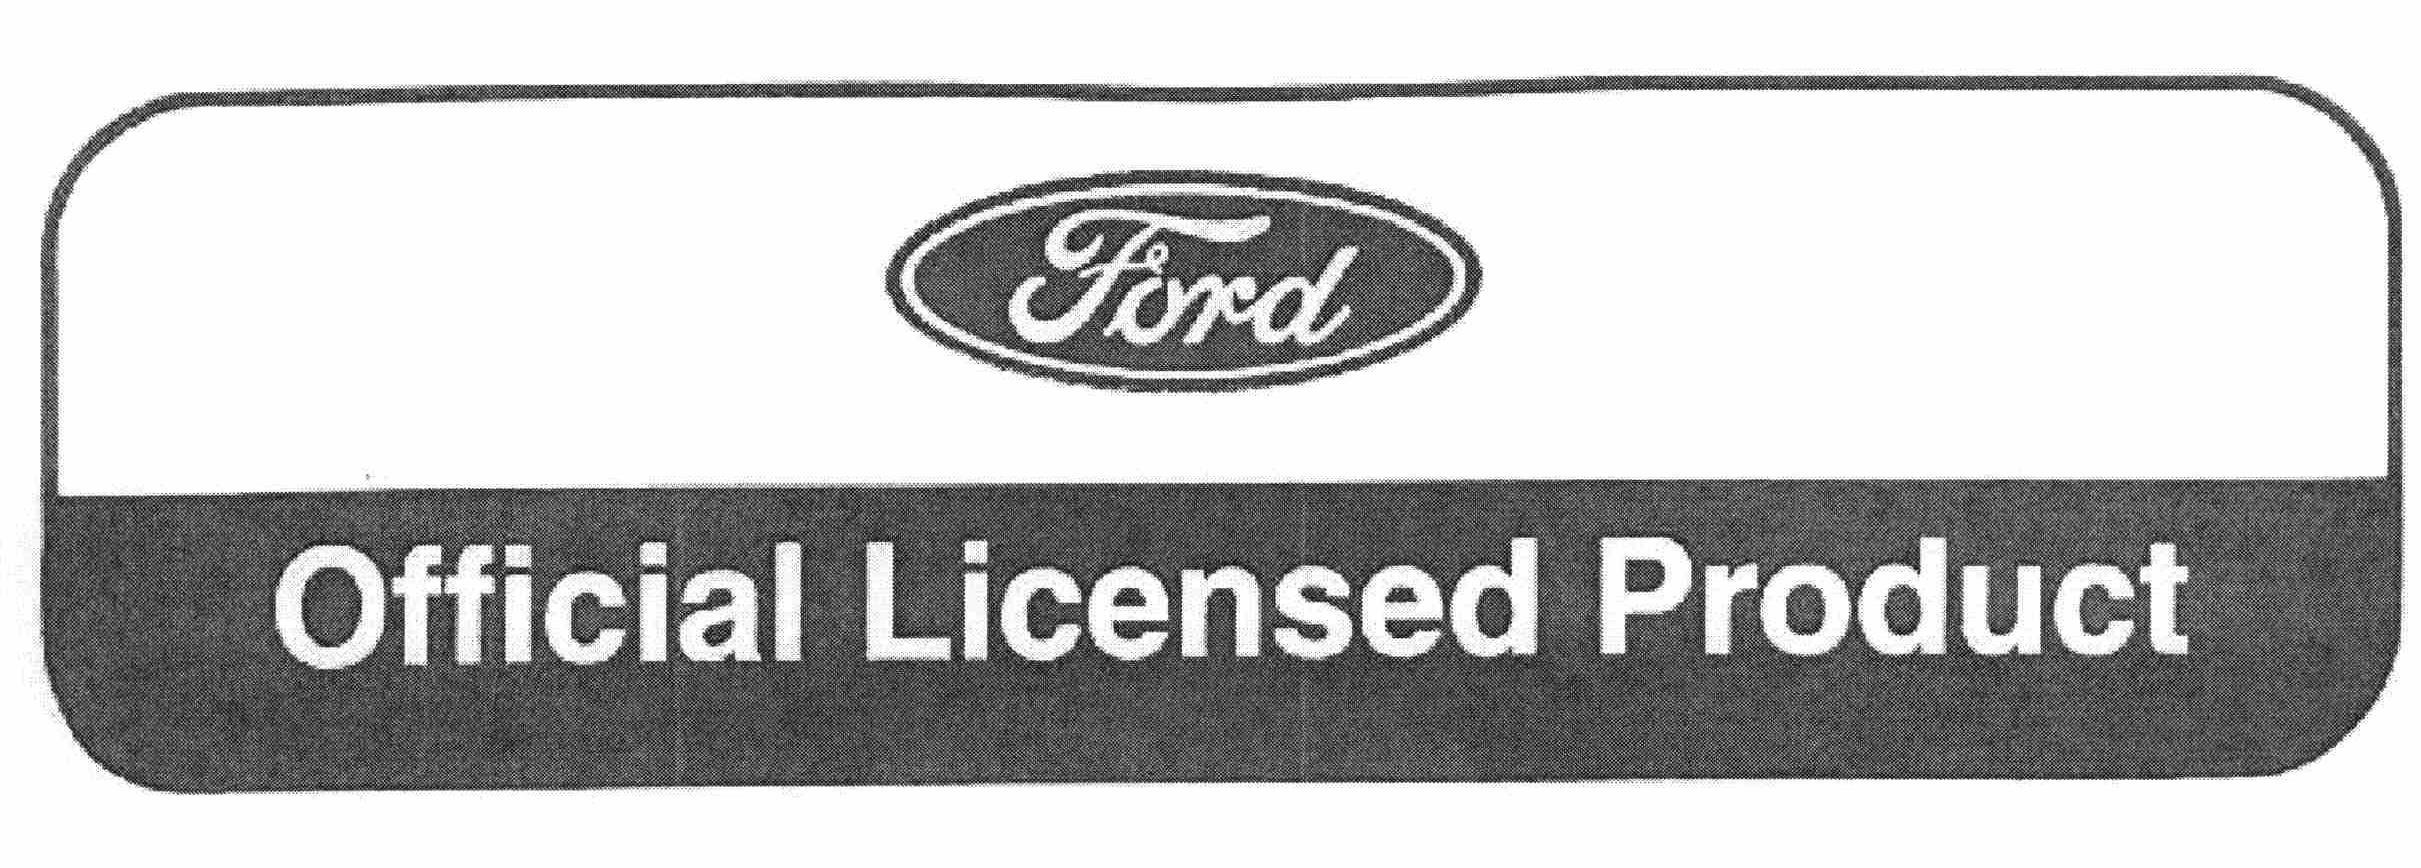 Trademark Logo FORD OFFICIAL LICENSED PRODUCT